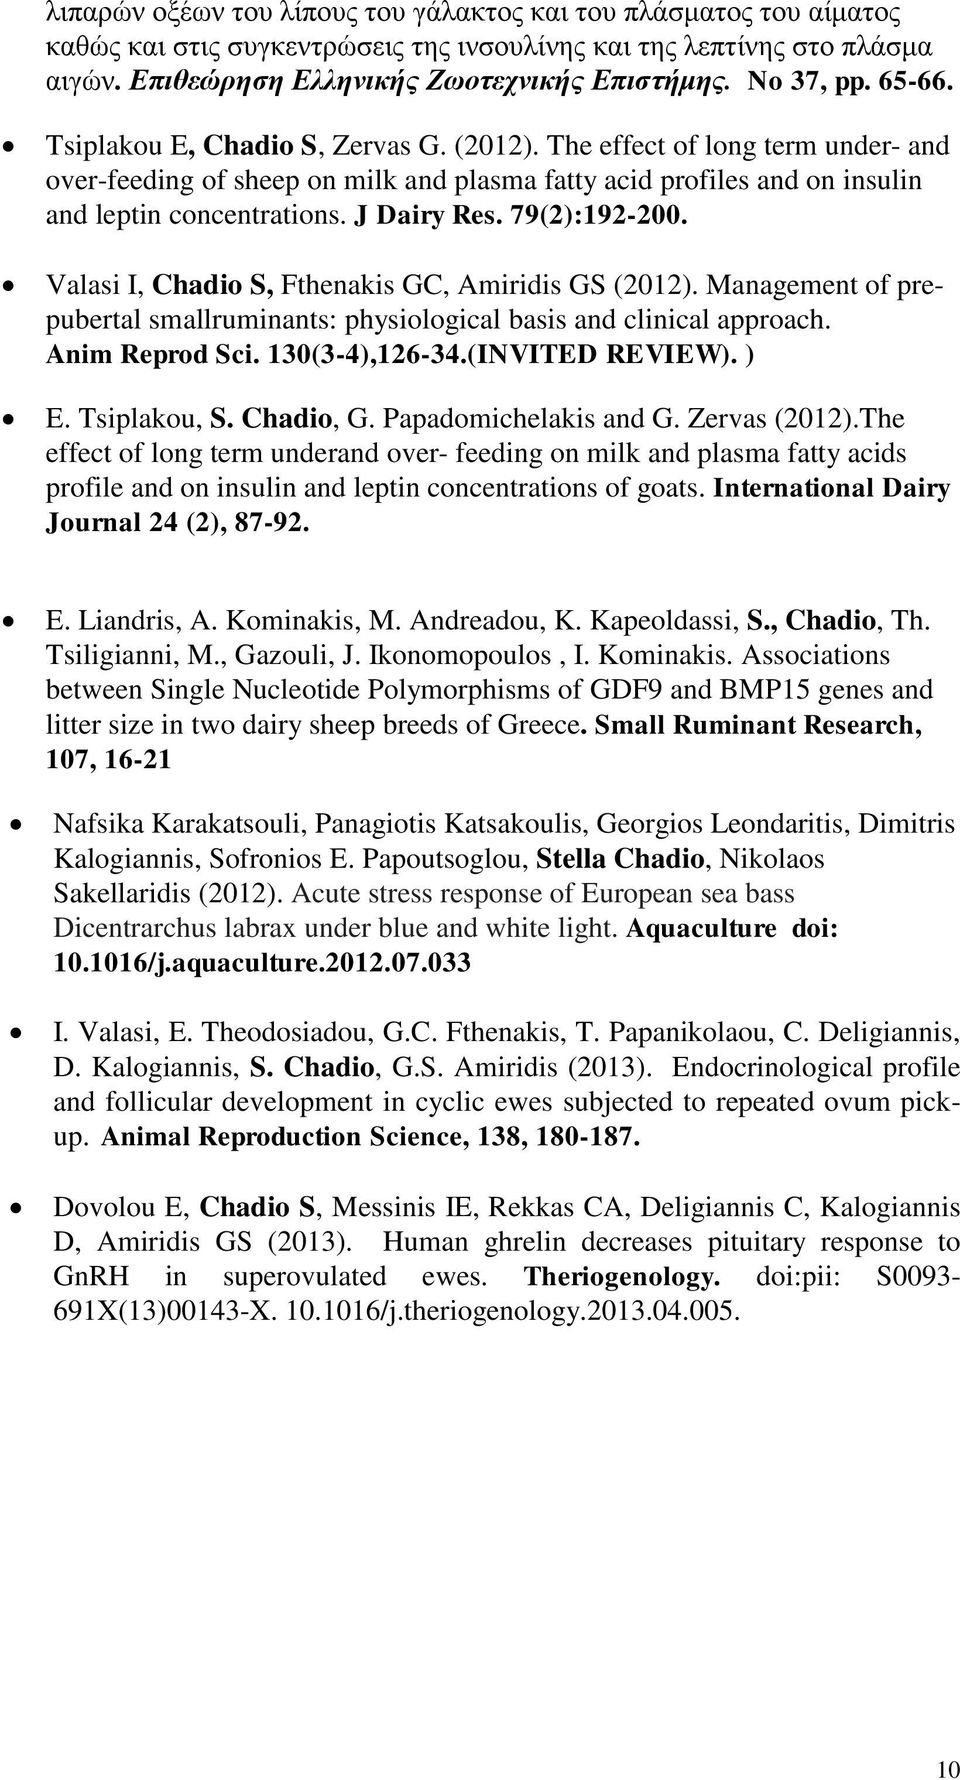 J Dairy Res. 79(2):192-200. Valasi I, Chadio S, Fthenakis GC, Amiridis GS (2012). Management of prepubertal smallruminants: physiological basis and clinical approach. Anim Reprod Sci. 130(3-4),126-34.